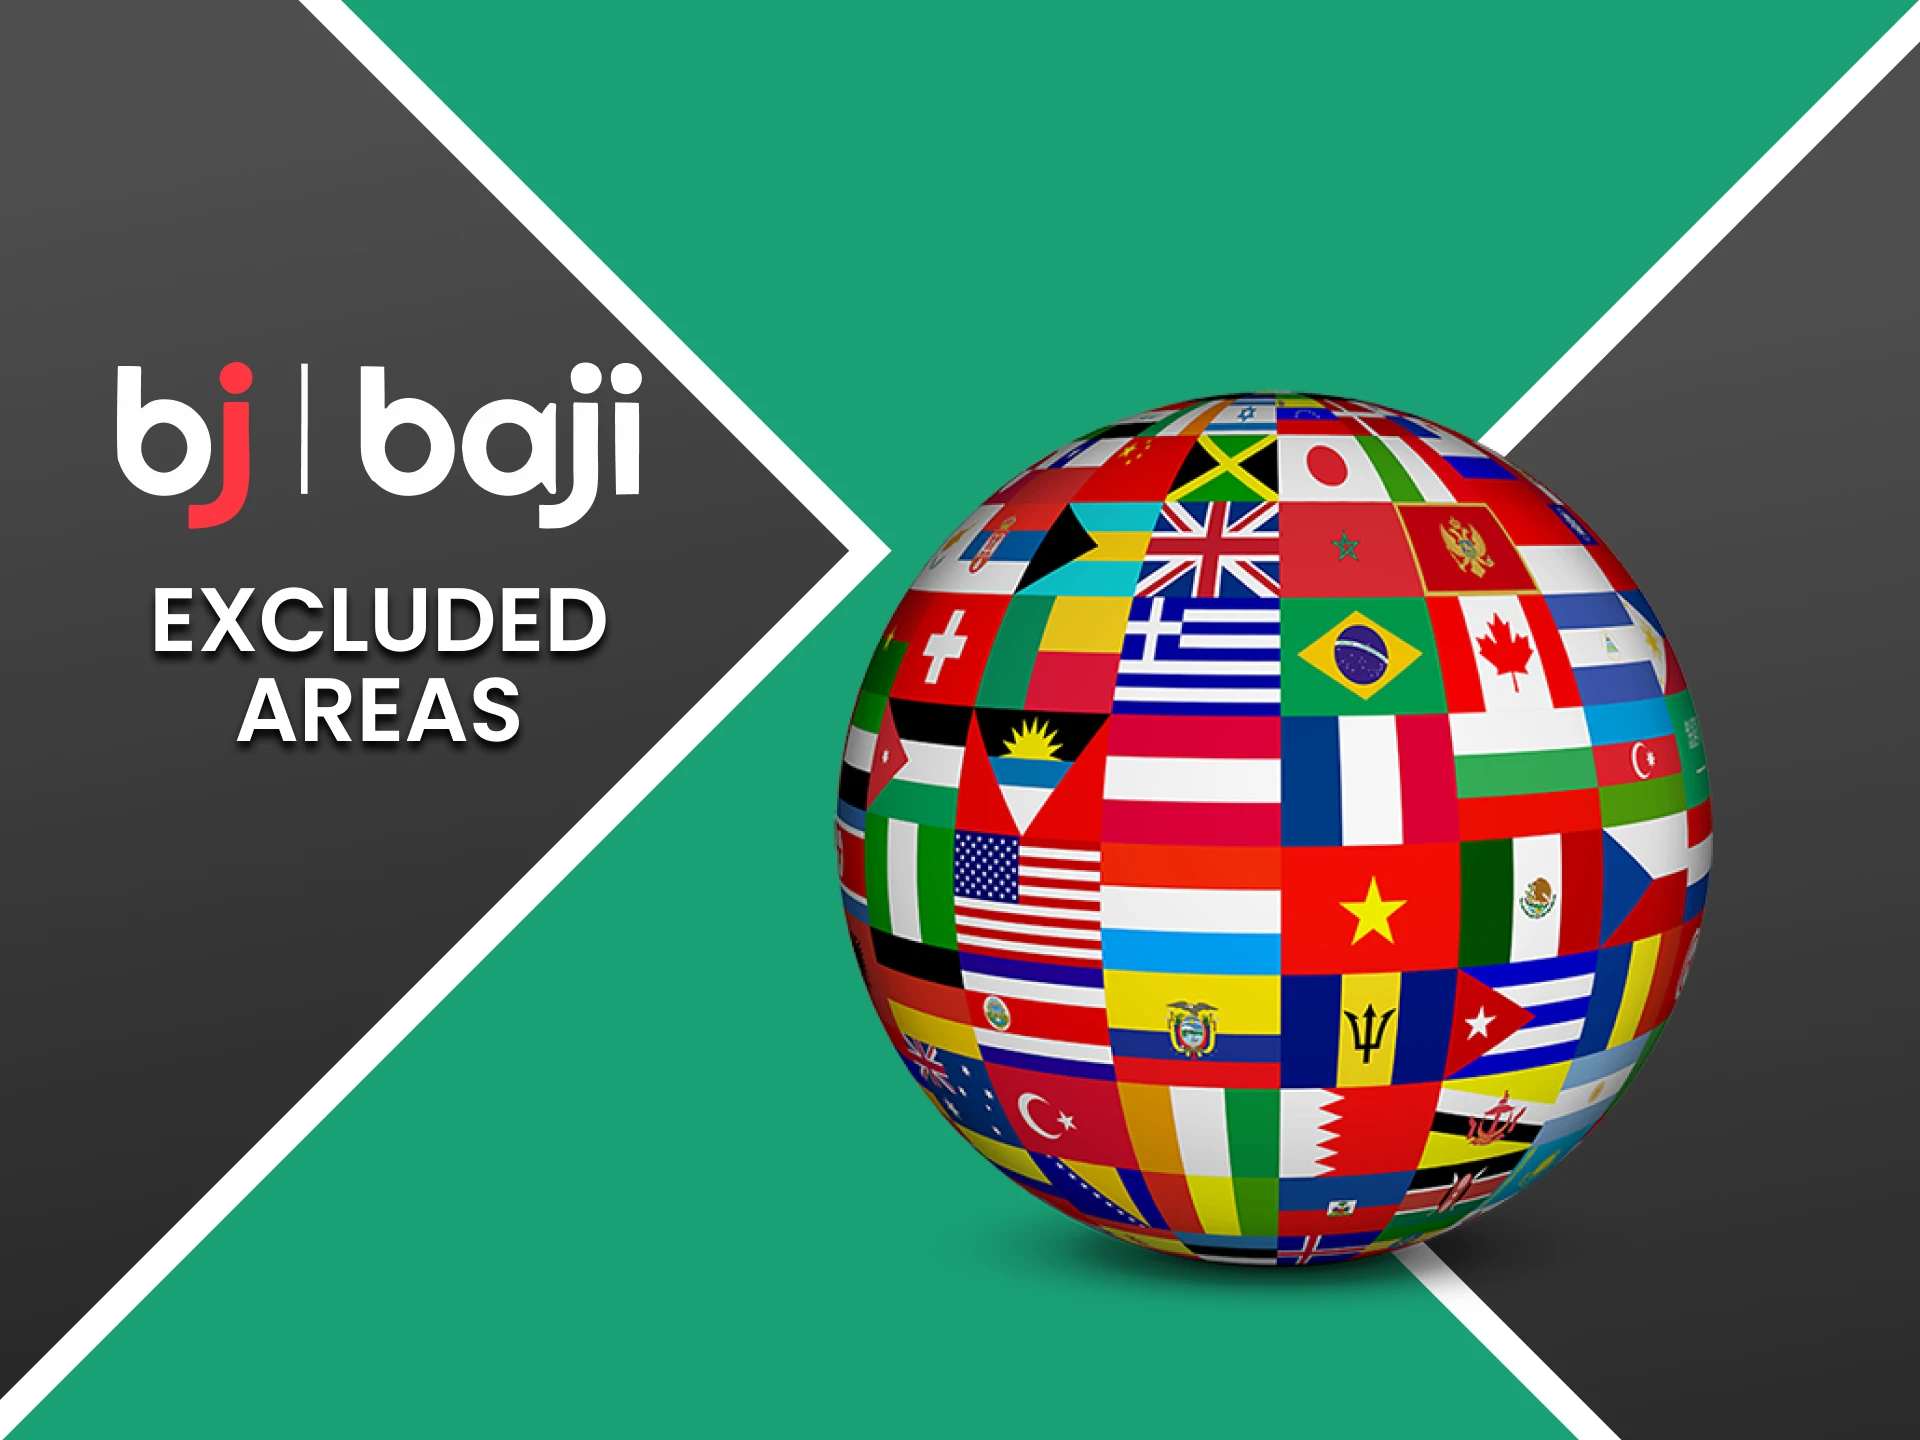 Find out in which countries the Baji website is banned.